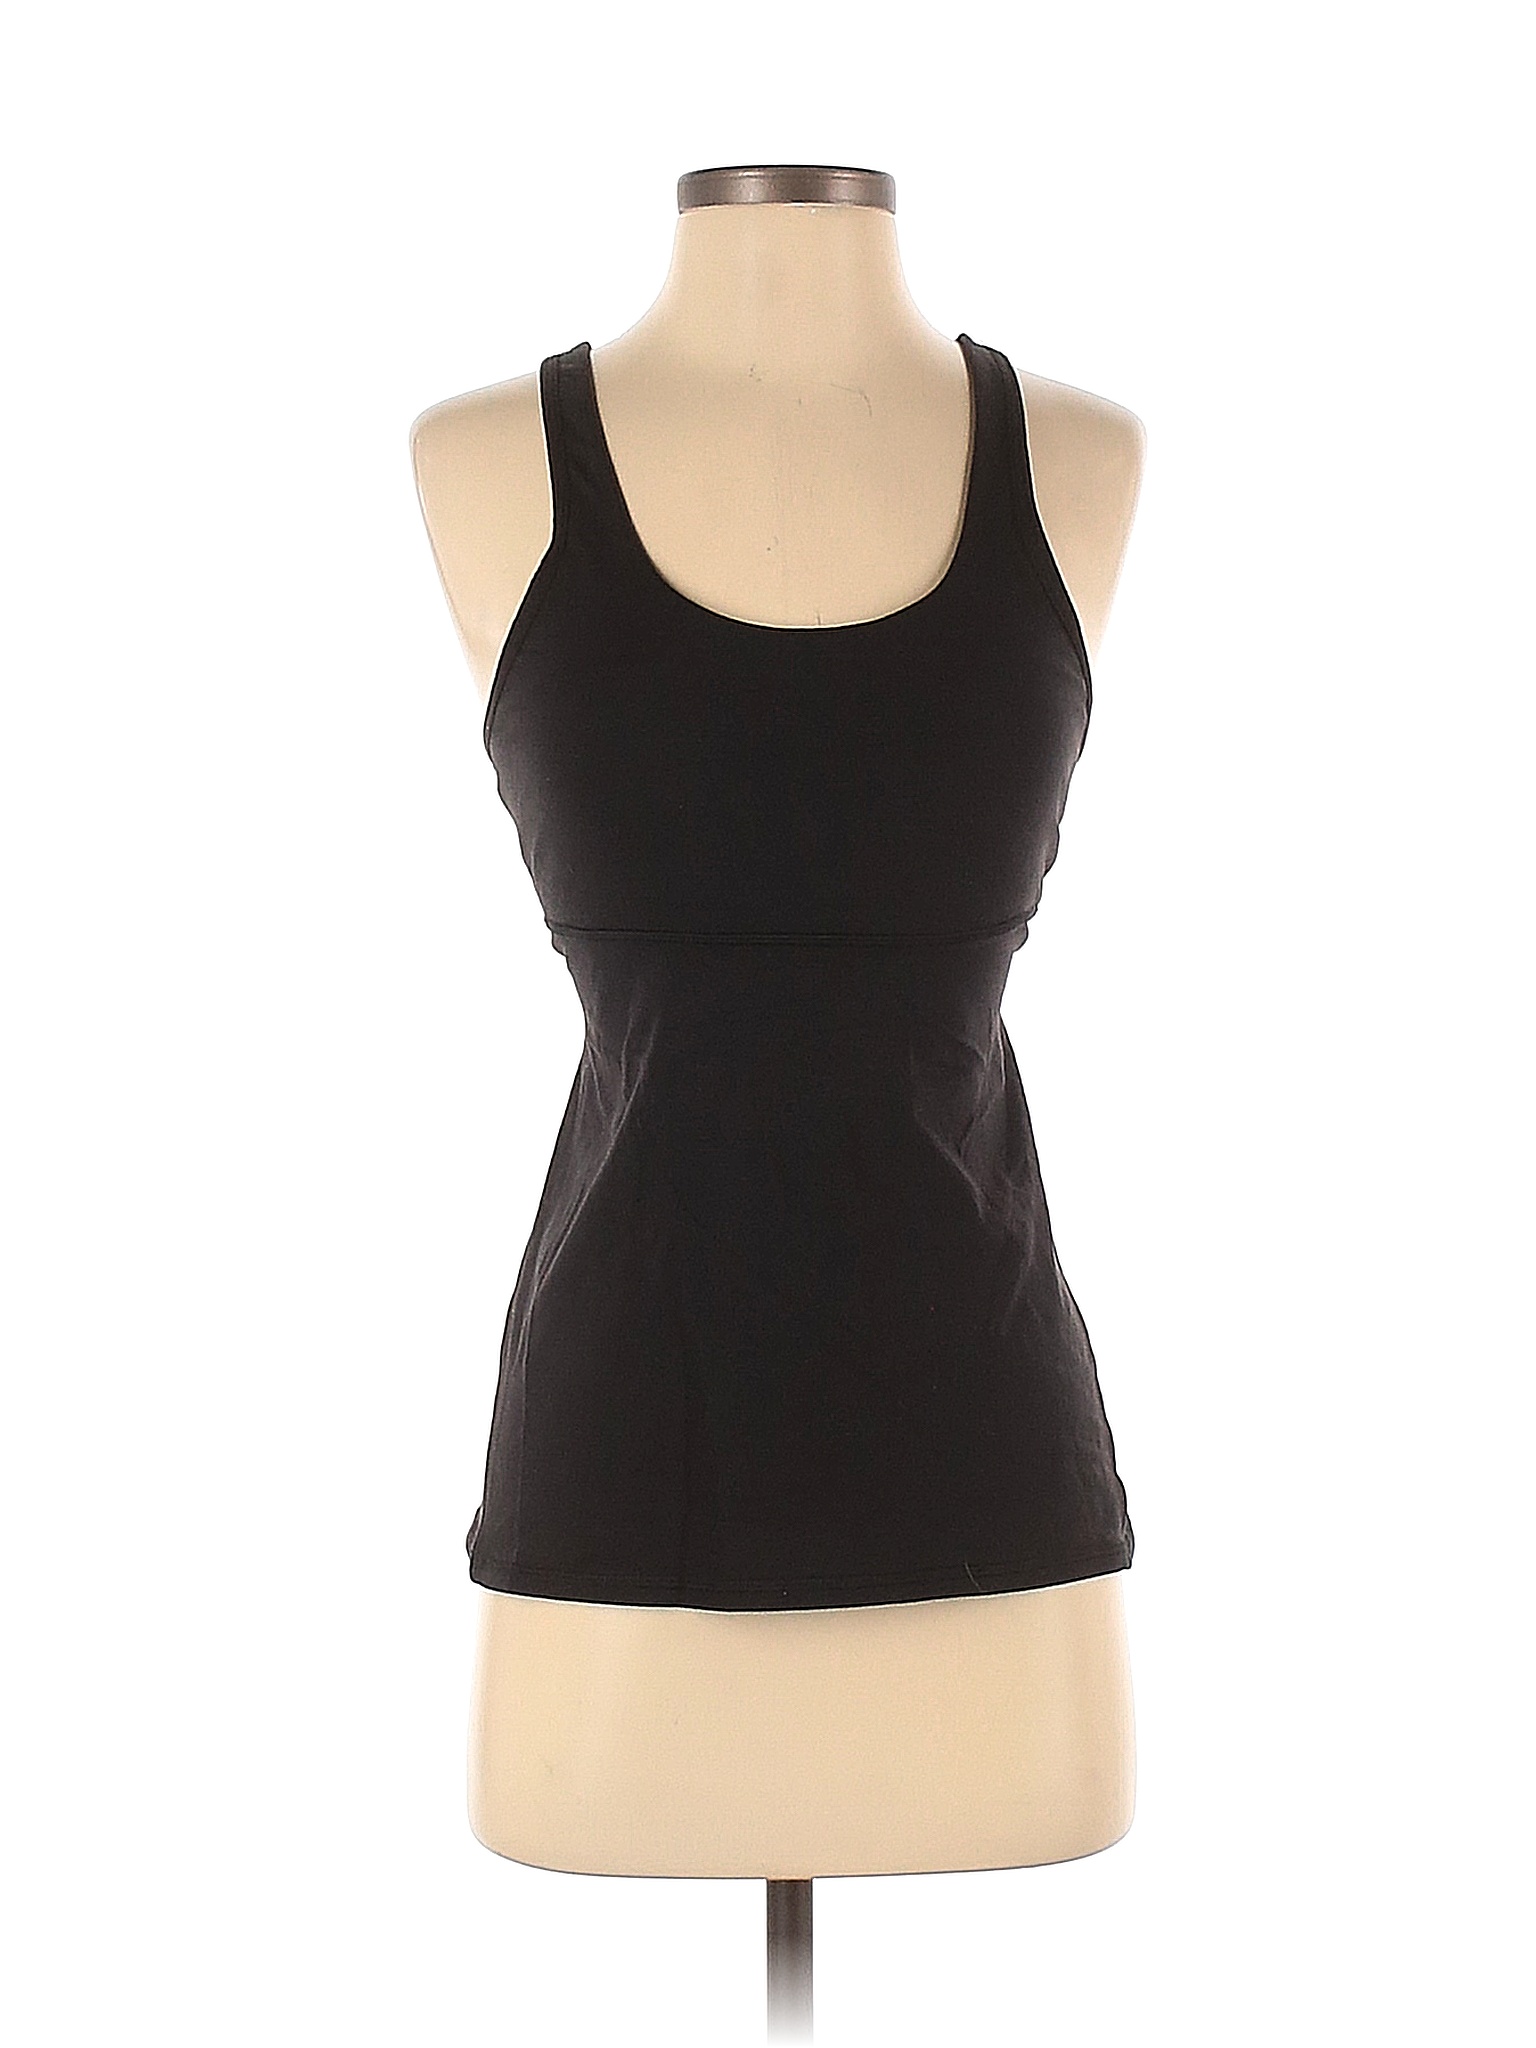 Pre-Owned Lululemon Athletica Womens Size 8 Active Togo